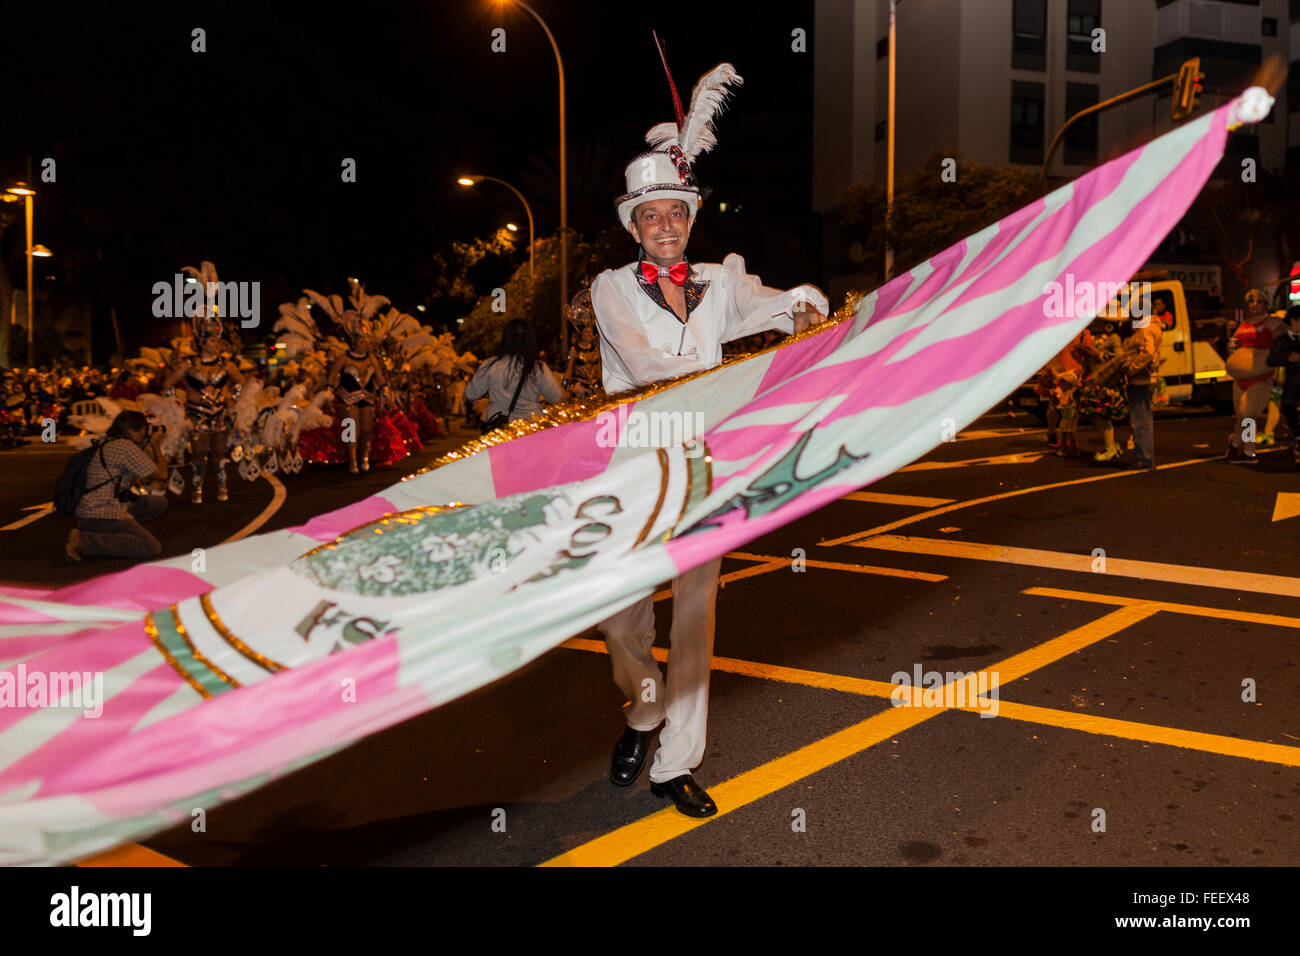 Santa Cruz, Tenerife. 5 Feb 2016. Characters, dancers and floats at the opening parade of the Carnaval de Santa Cruz de Tenerife. Thousands of people in groups of dancers, murgas, comparsas, and general fancy dress celebrate the official start to Carnival with the night parade through the streets of Santa Cruz. Stock Photo